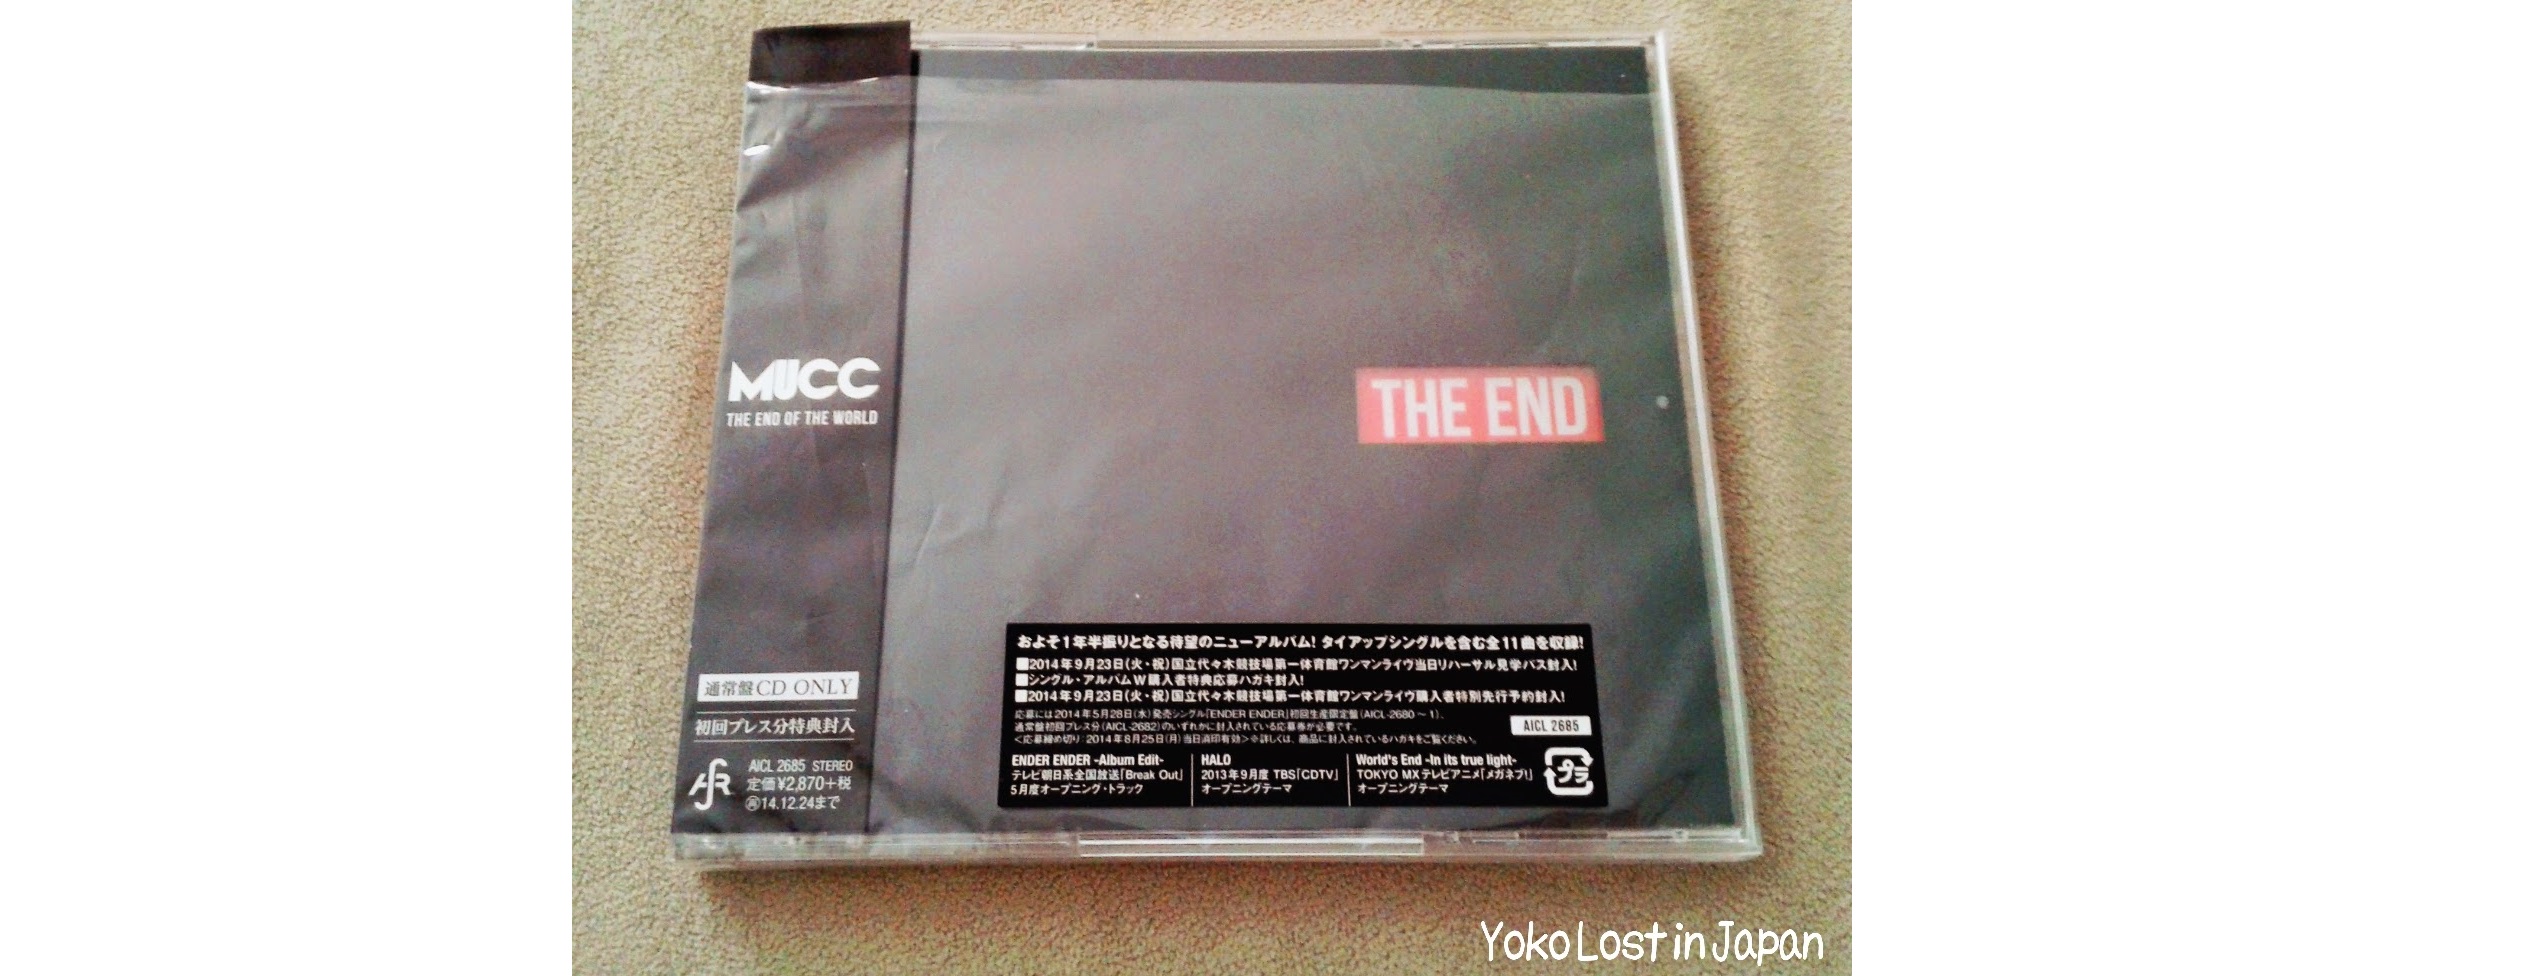 [Musik] MUCC – The End of the World